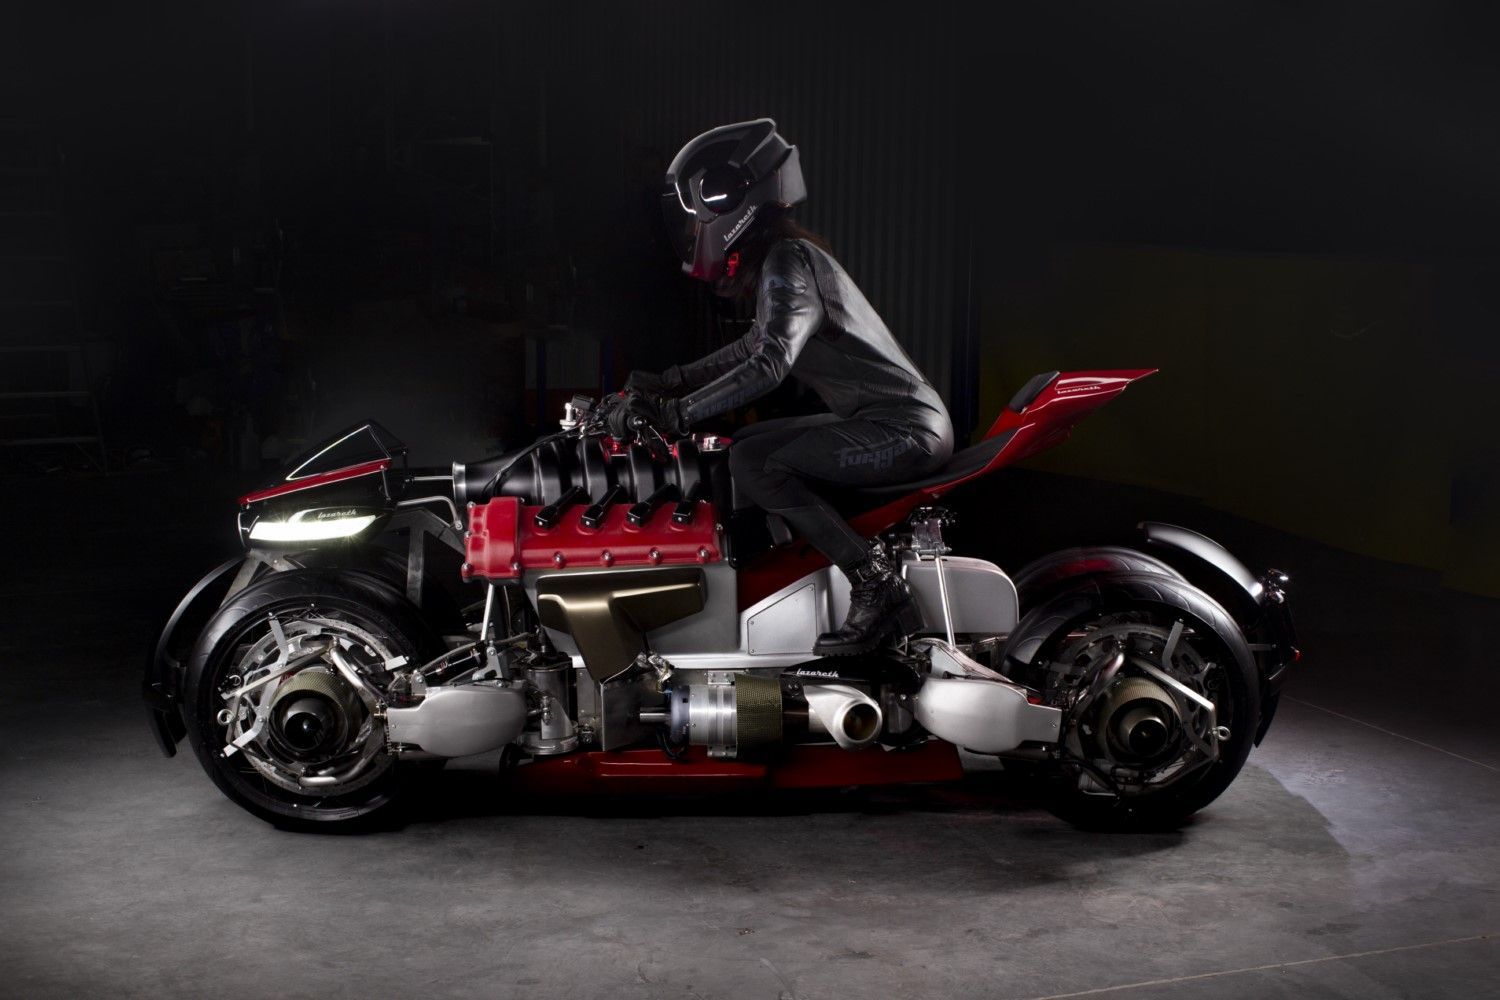 The Lazareth uses a number of parts off the Ducati Panigale